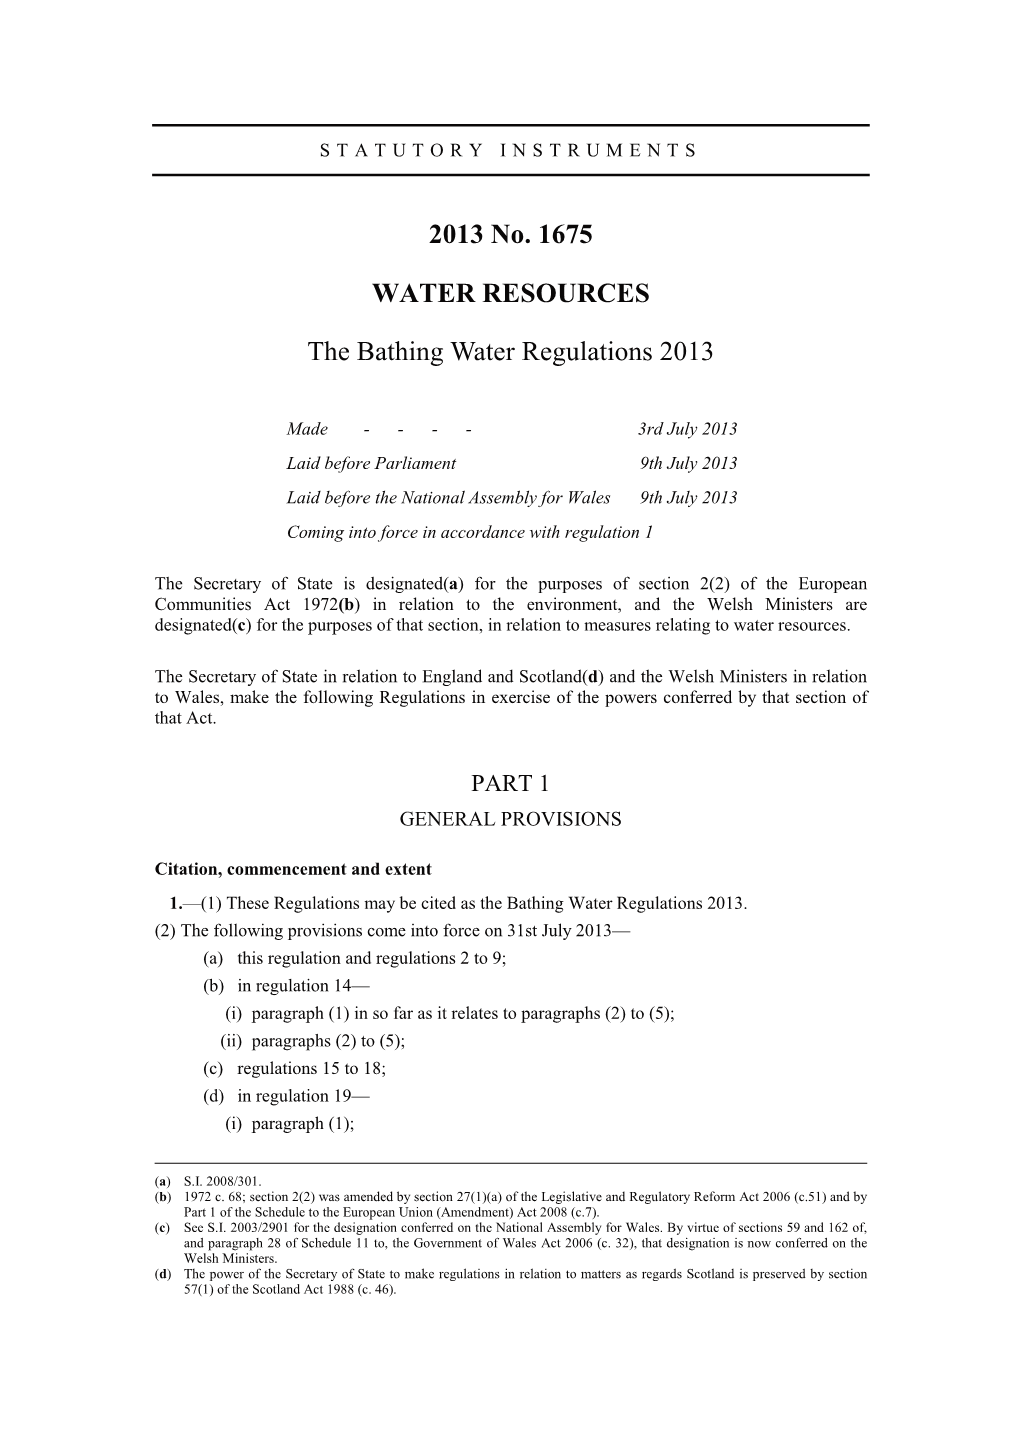 2013 No. 1675 WATER RESOURCES the Bathing Water Regulations 2013